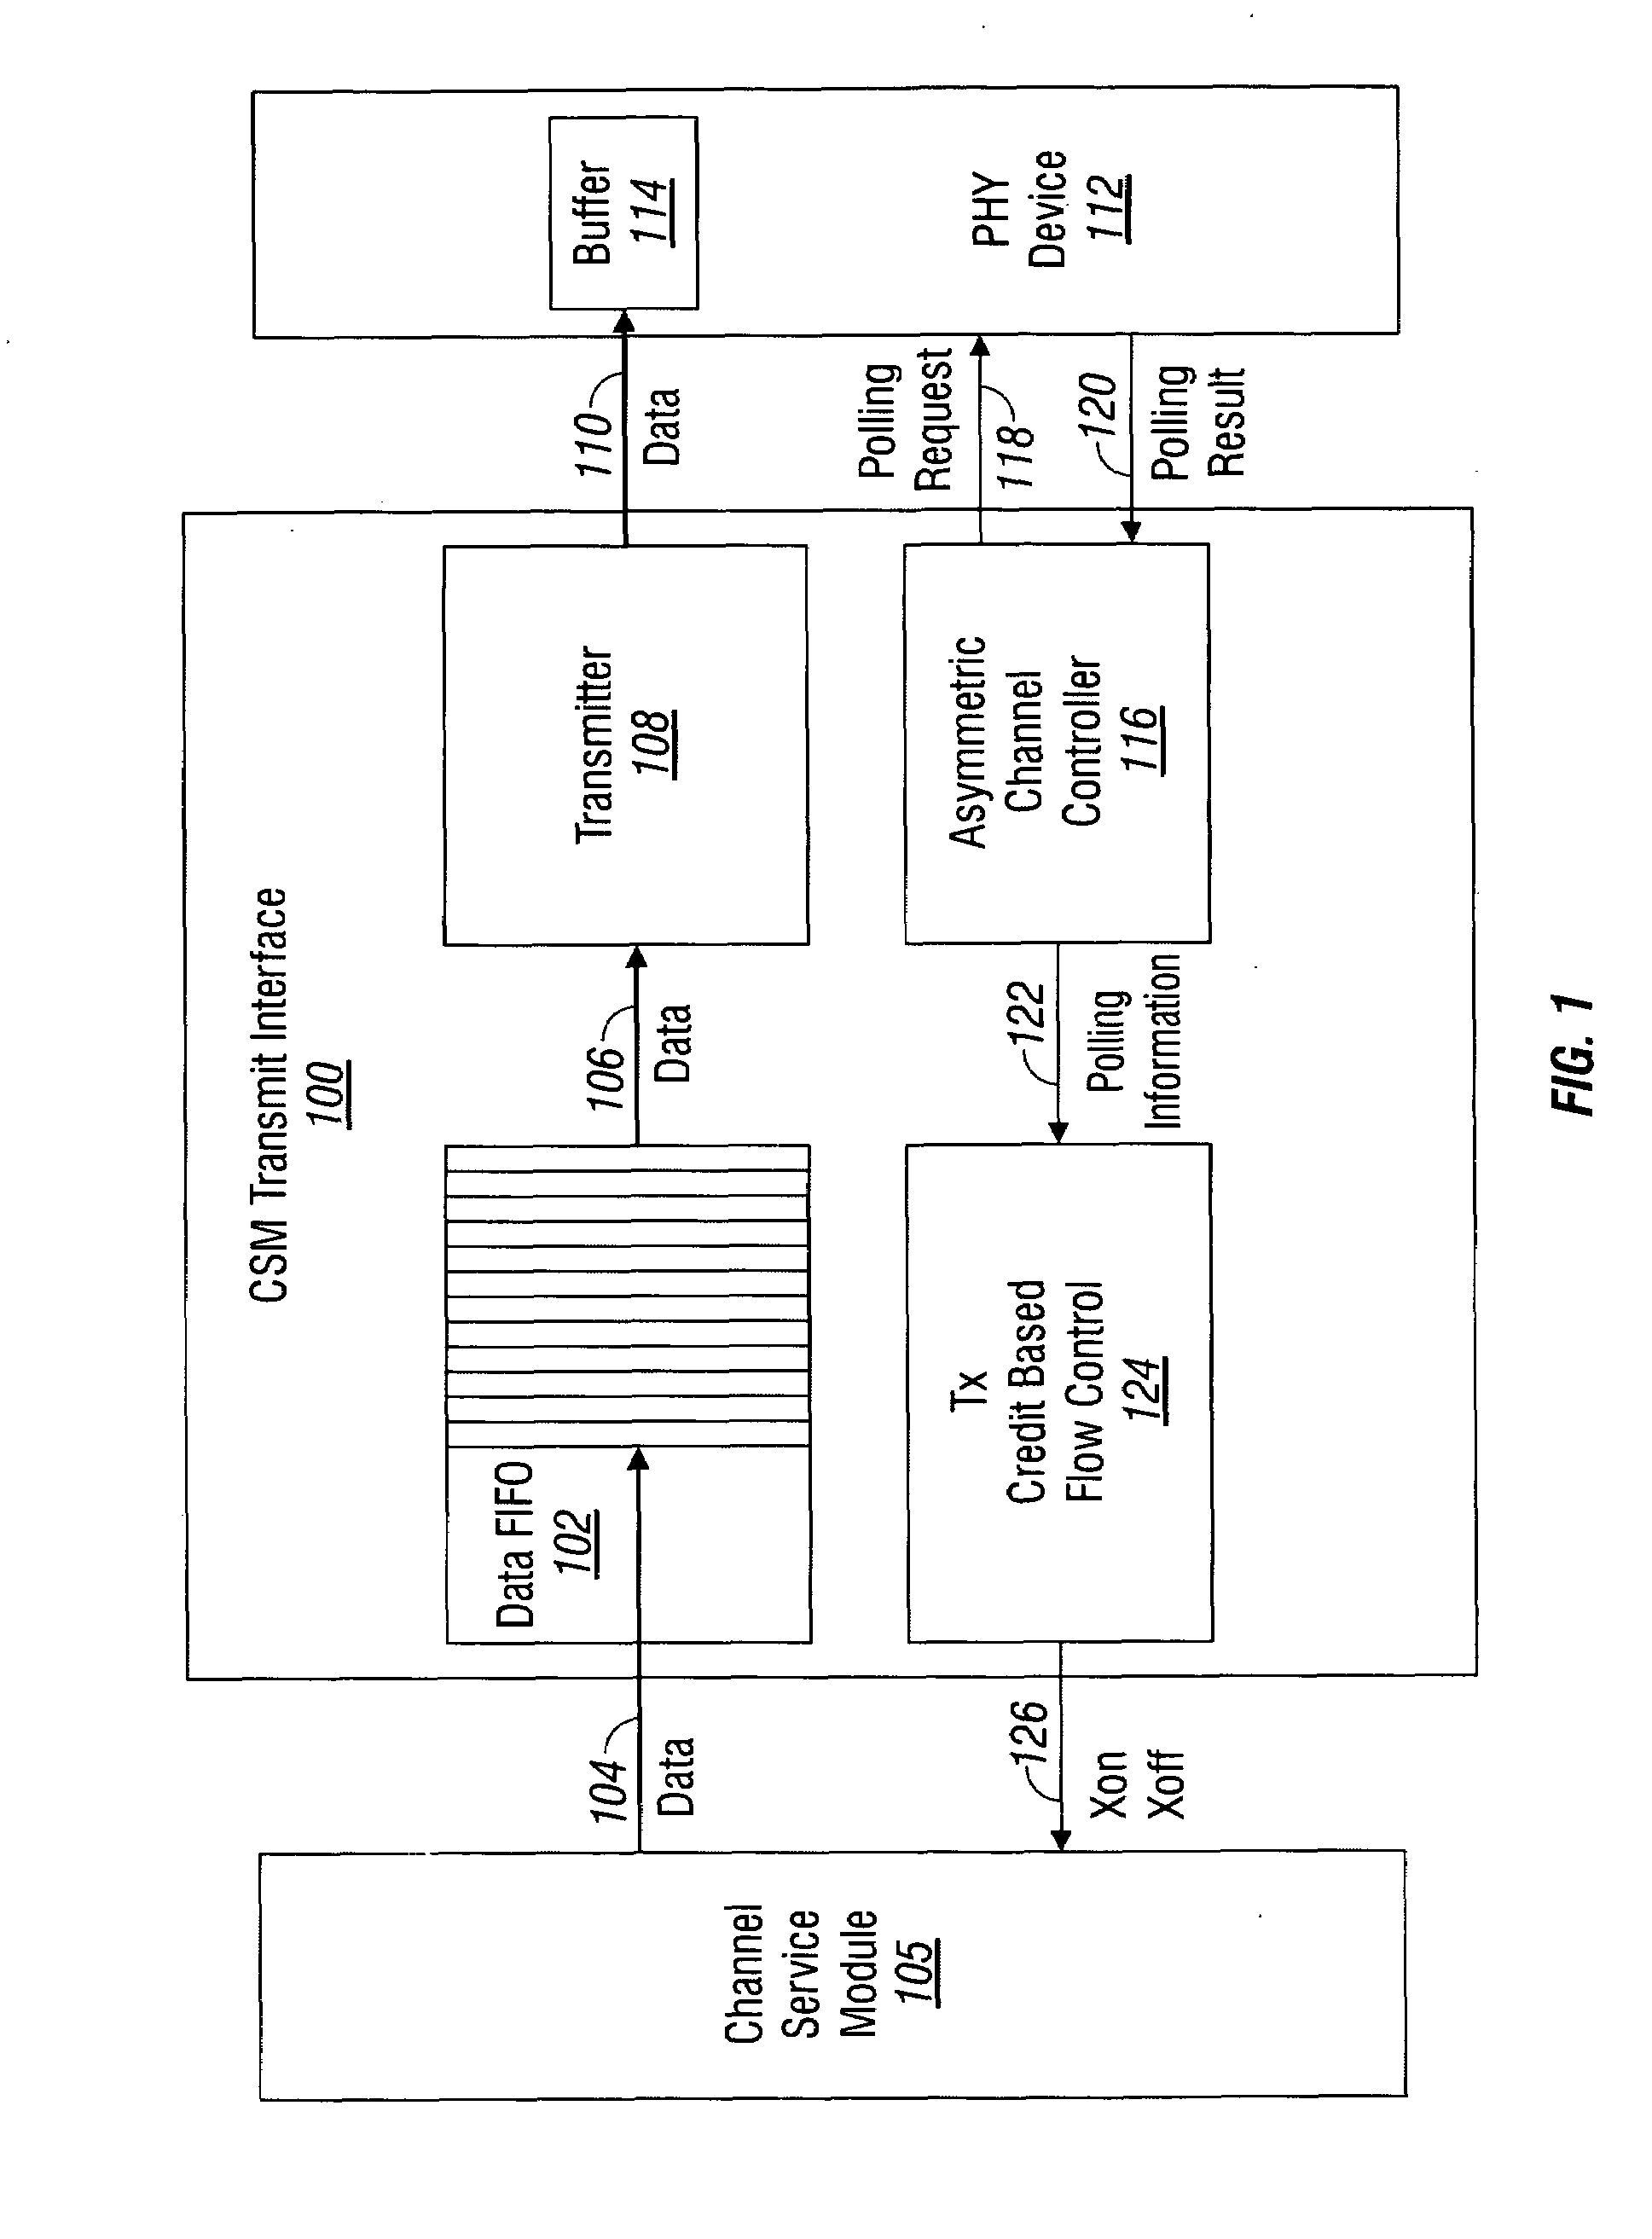 Credit based flow control in an asymmetric channel environment